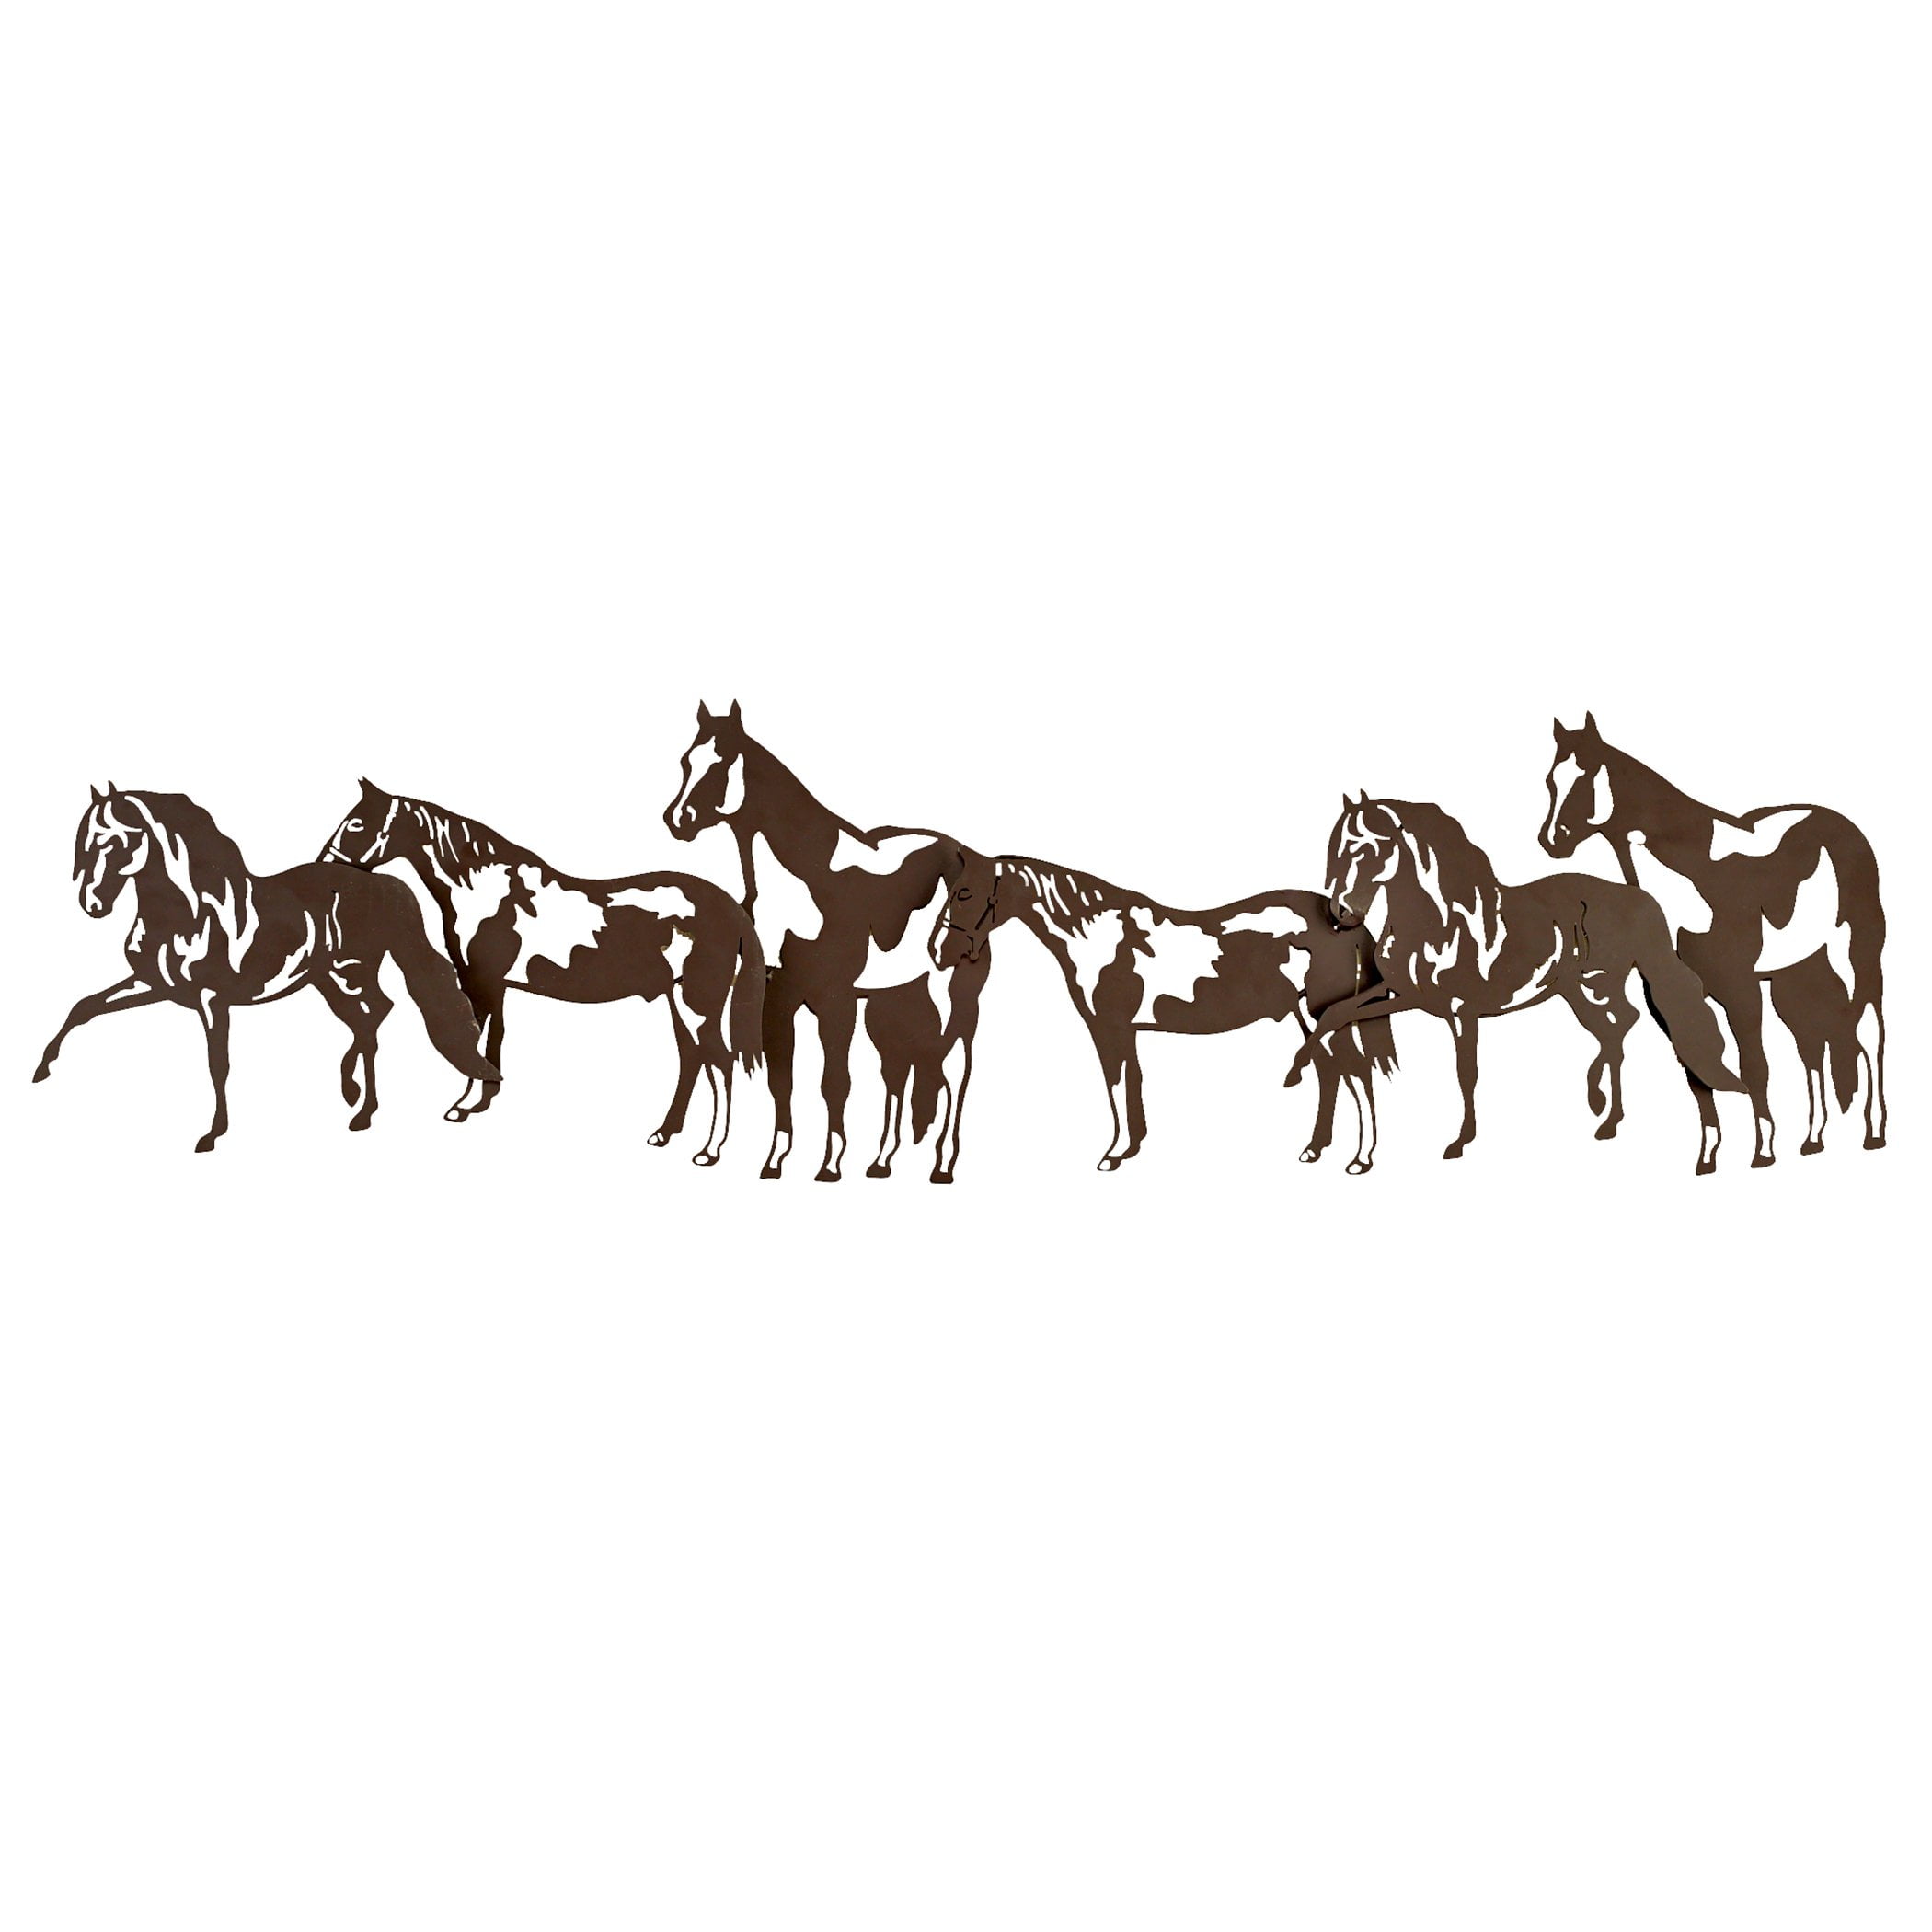 20 x Die Cut Silhouette Horses Card Toppers   Card Making Crafts Candle Jars